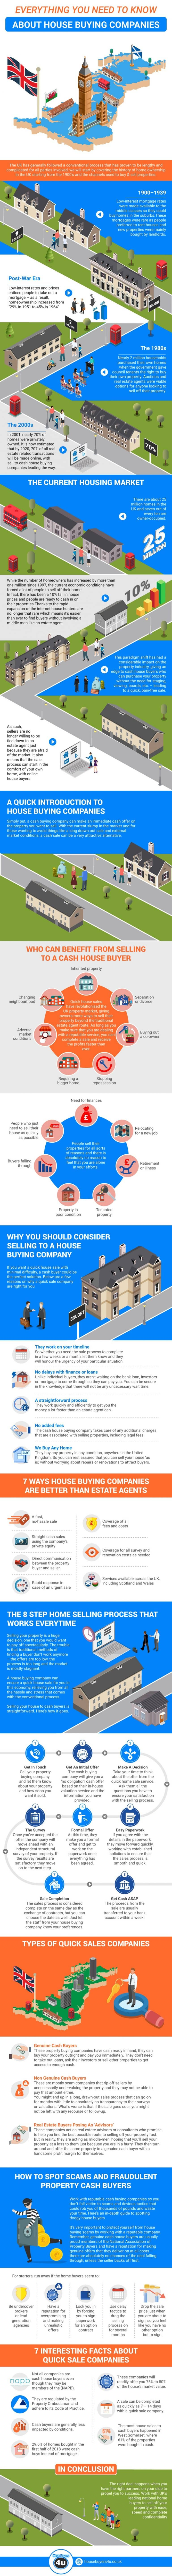 Everything you Need to Know about House Buying Companies in the UK (Infographic)